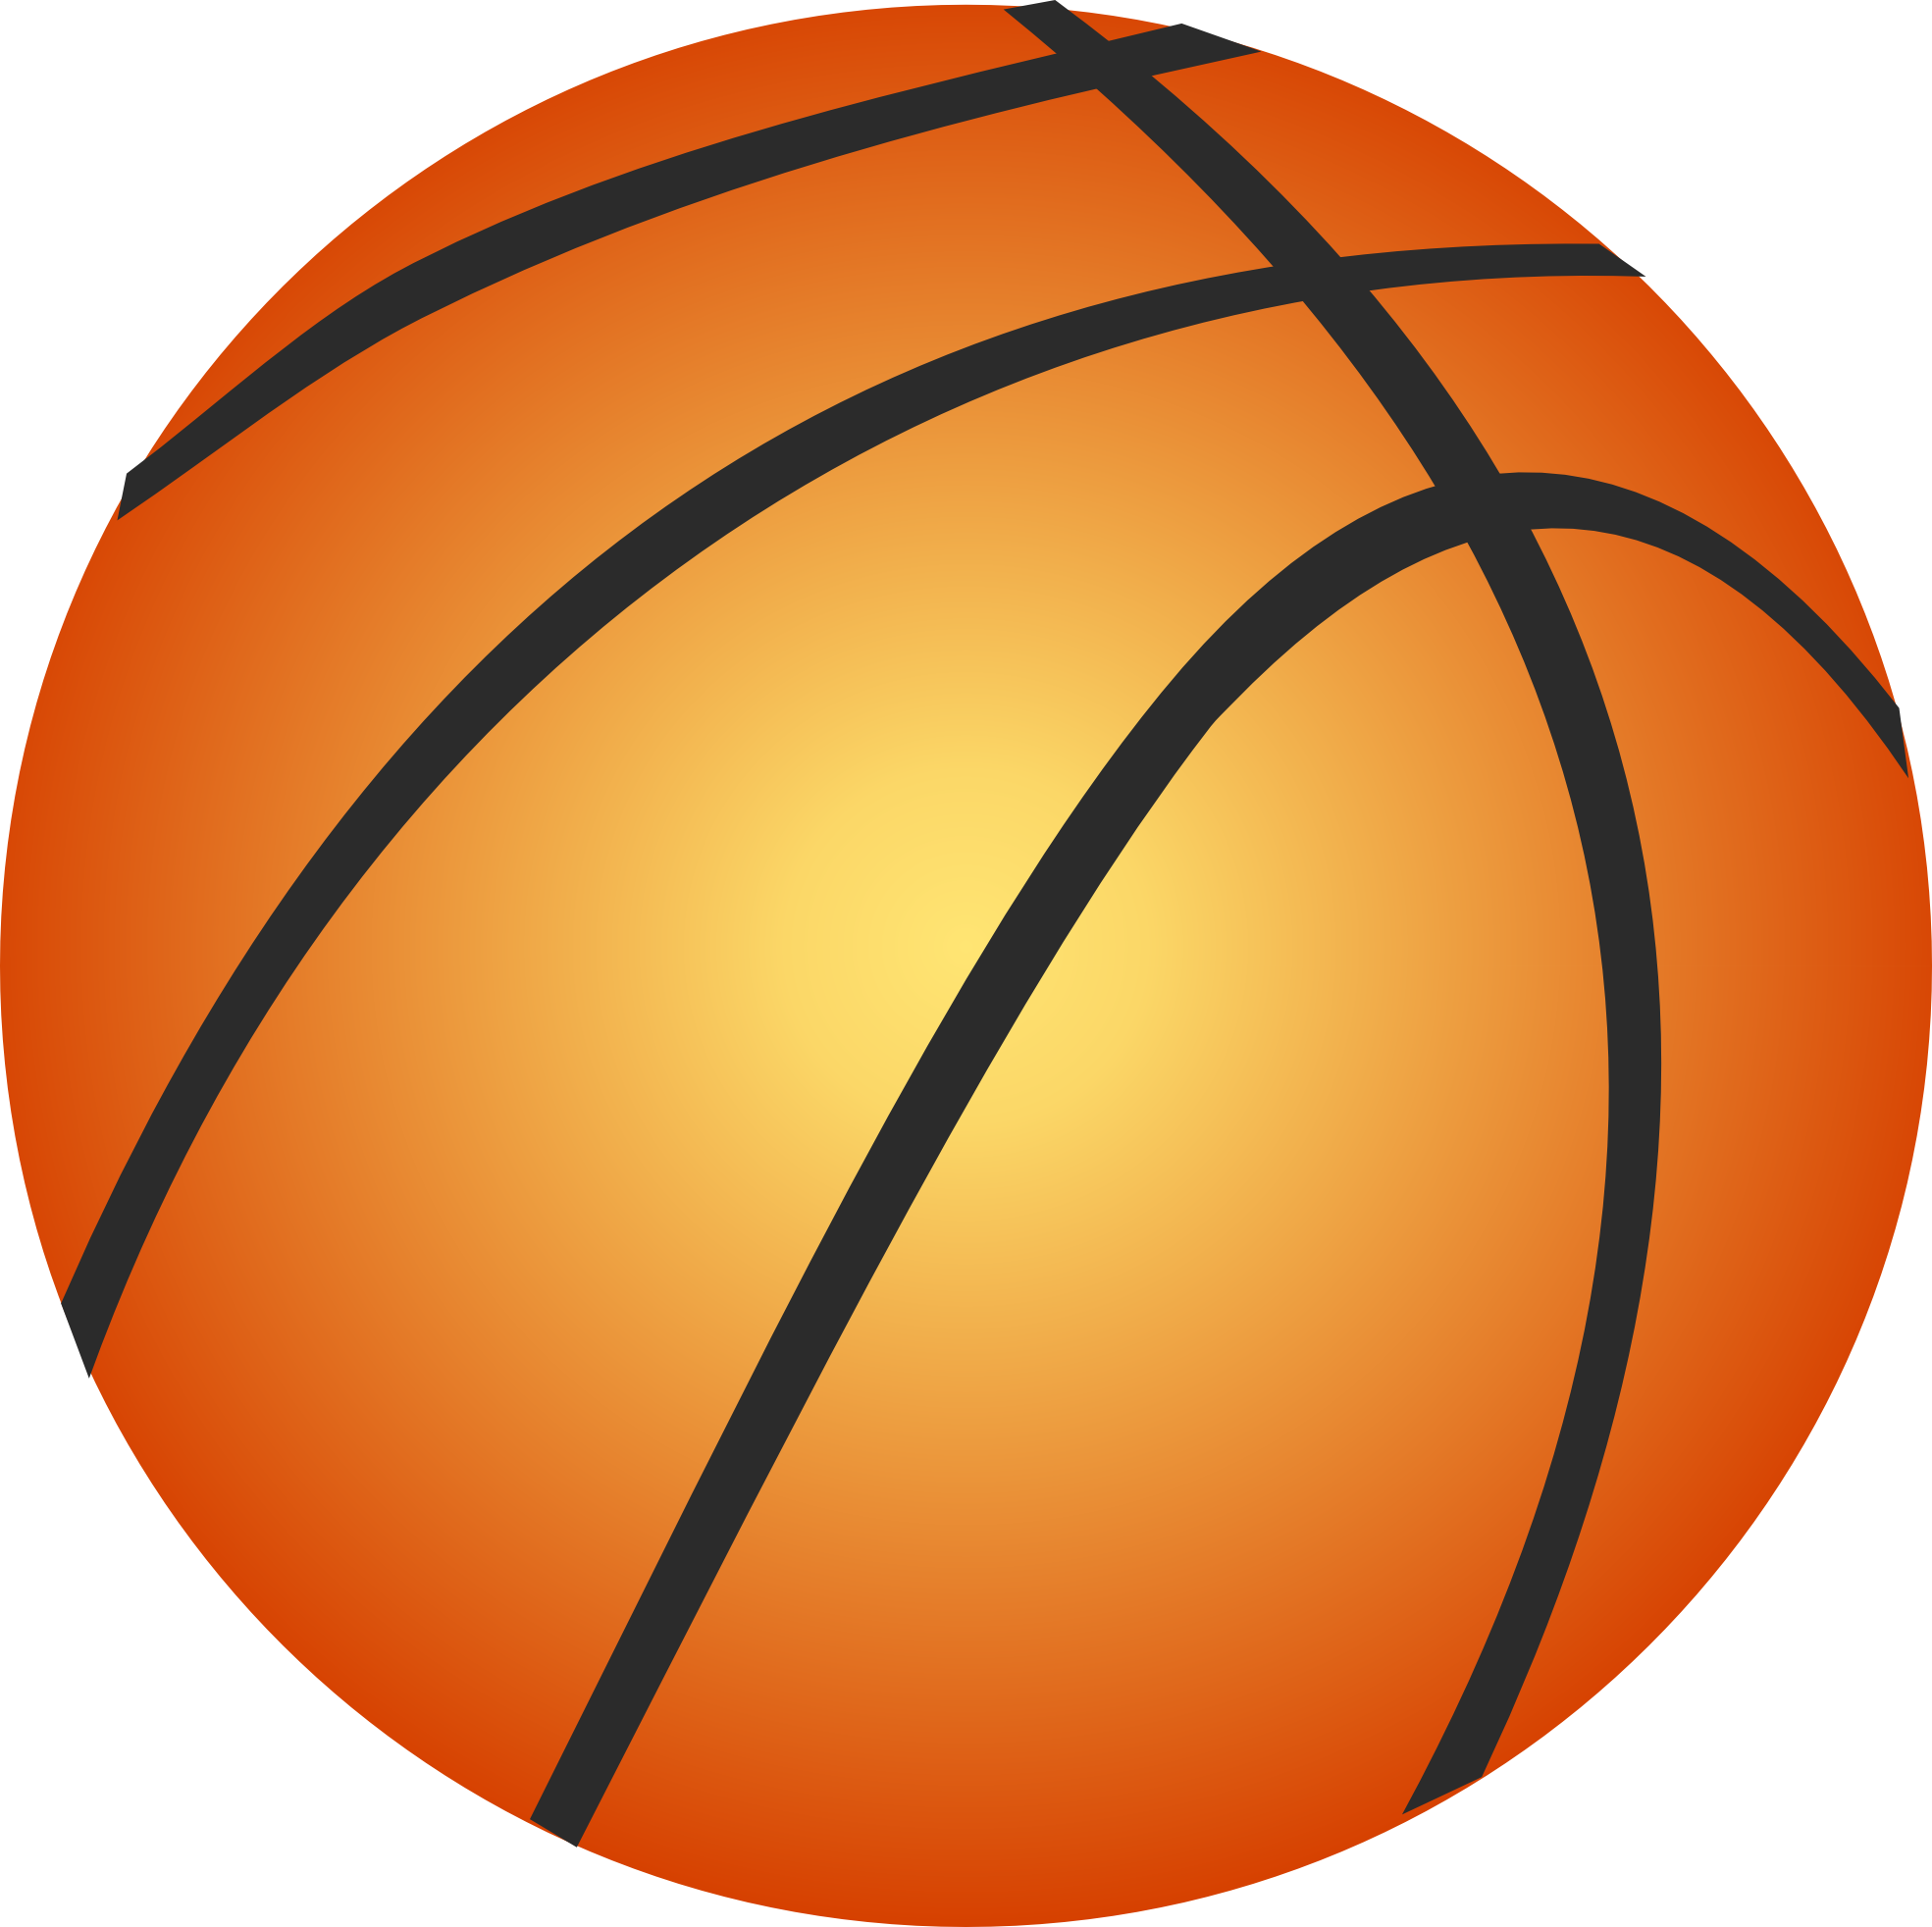 Basketball clipart free images 3